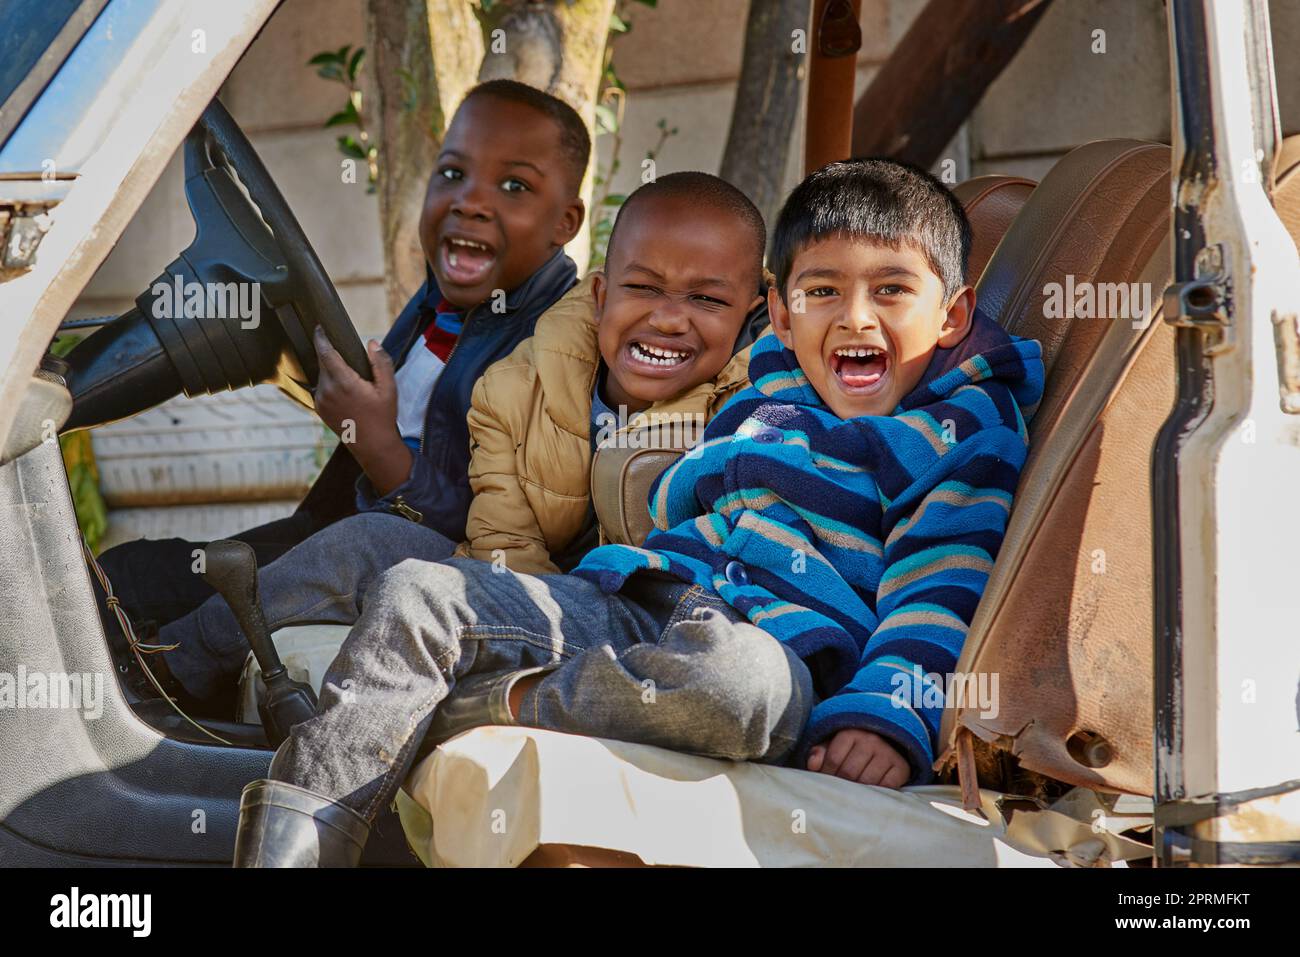 Theyre just being silly. Portrait of a group of little boys having fun while sitting in a car. Stock Photo